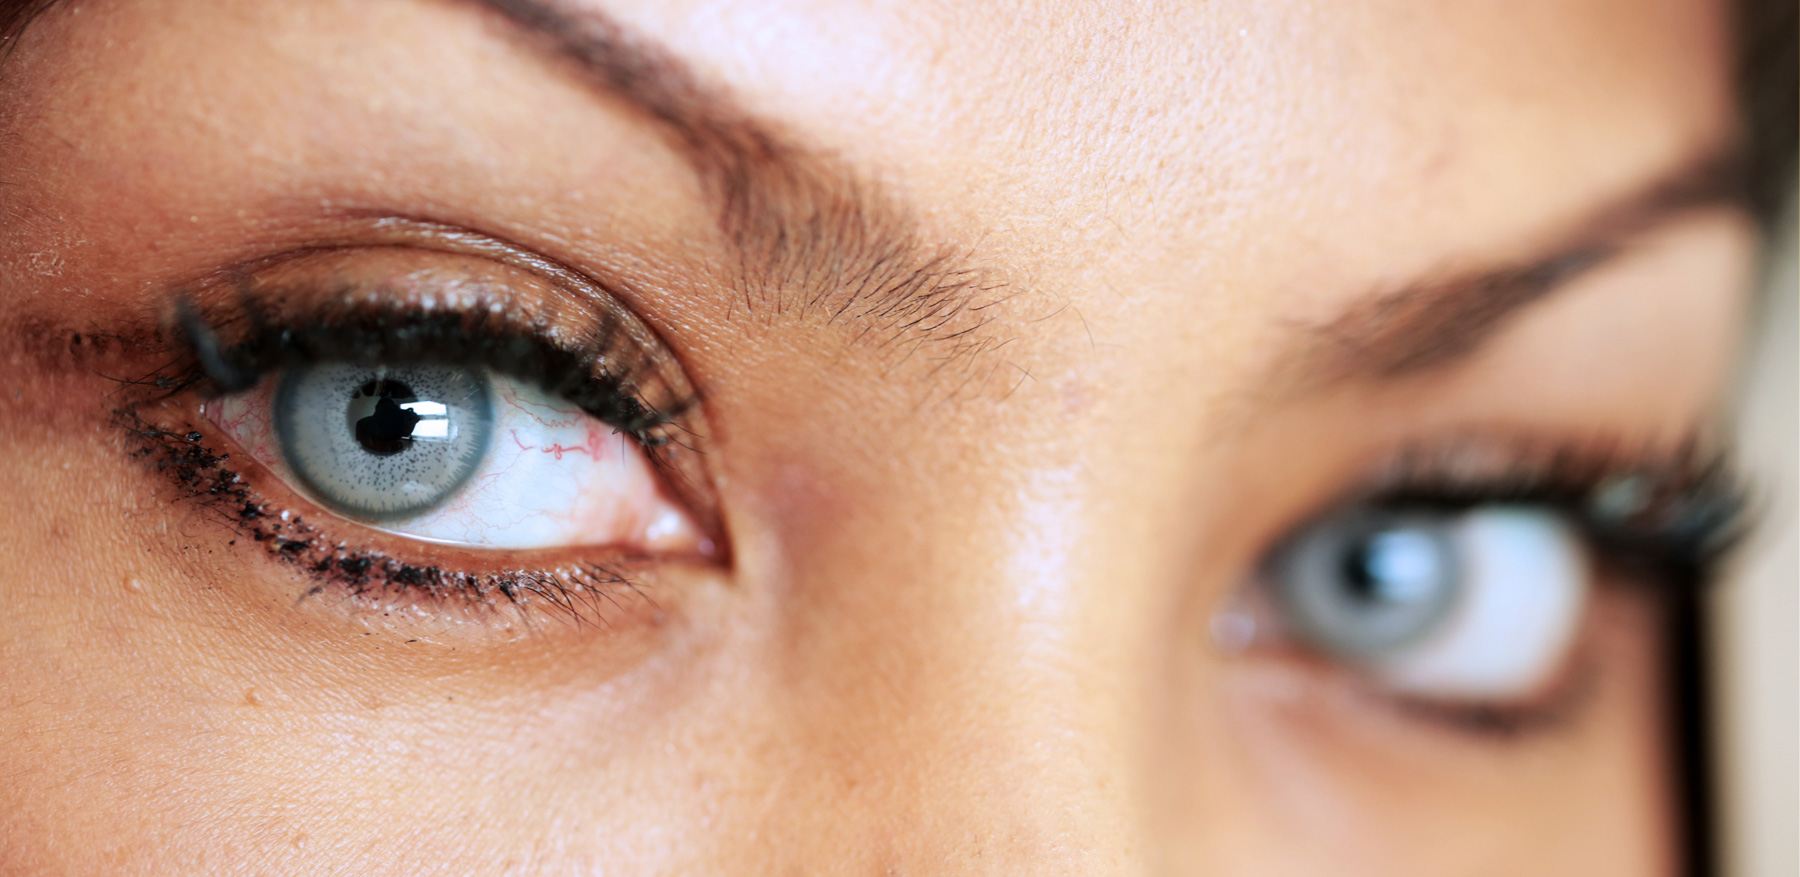 You can now change the color of your eyes, permanently